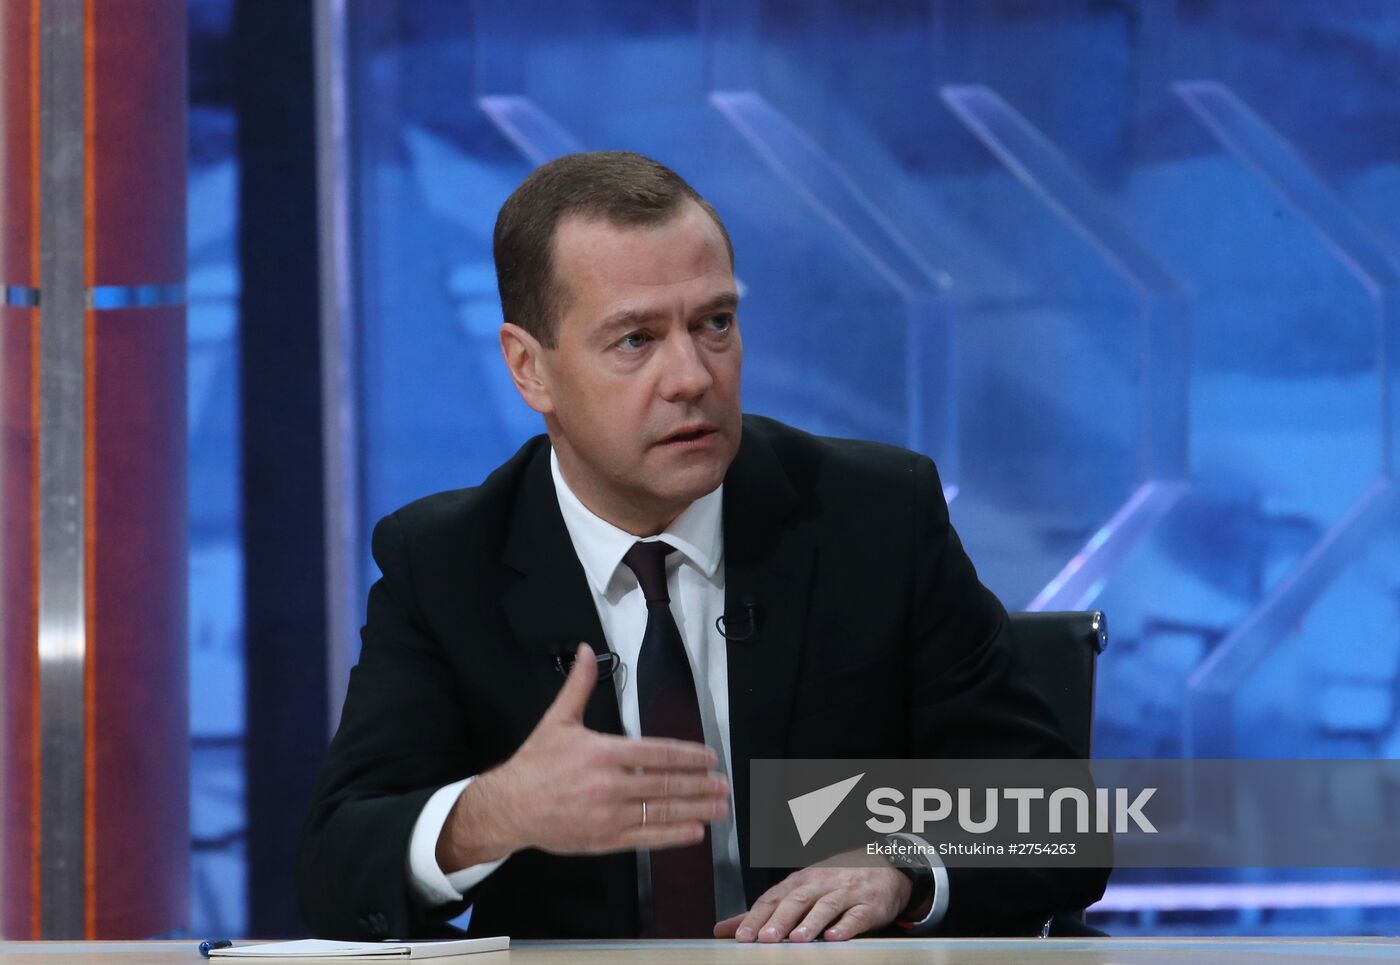 Prime Minister Dmitry Medvedev's interview with five television channels